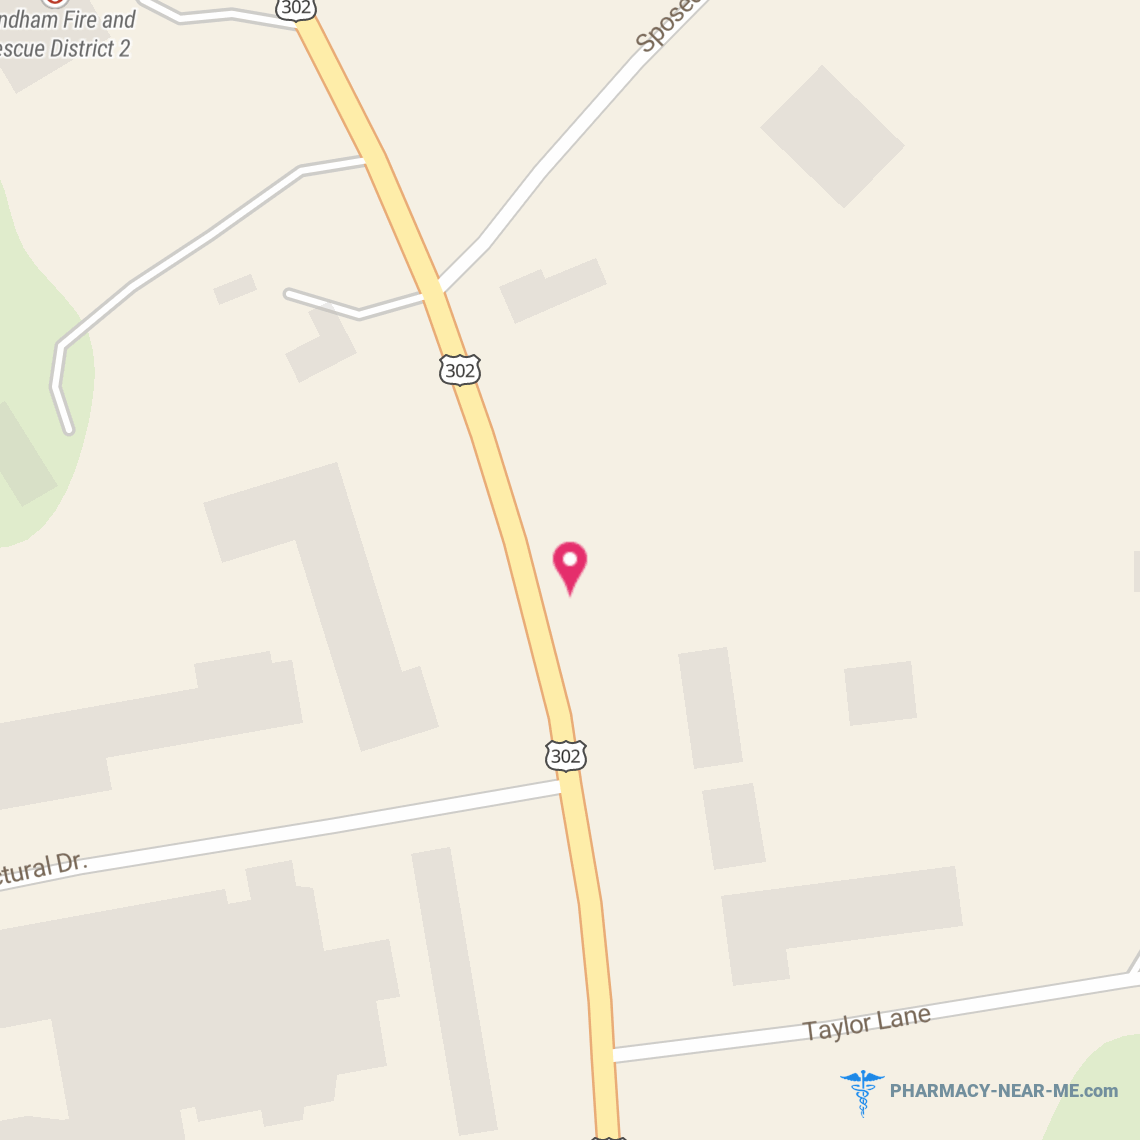 WALGREENS #10428 - Pharmacy Hours, Phone, Reviews & Information: 741 Roosevelt Trail, Windham, Maine 04062, United States